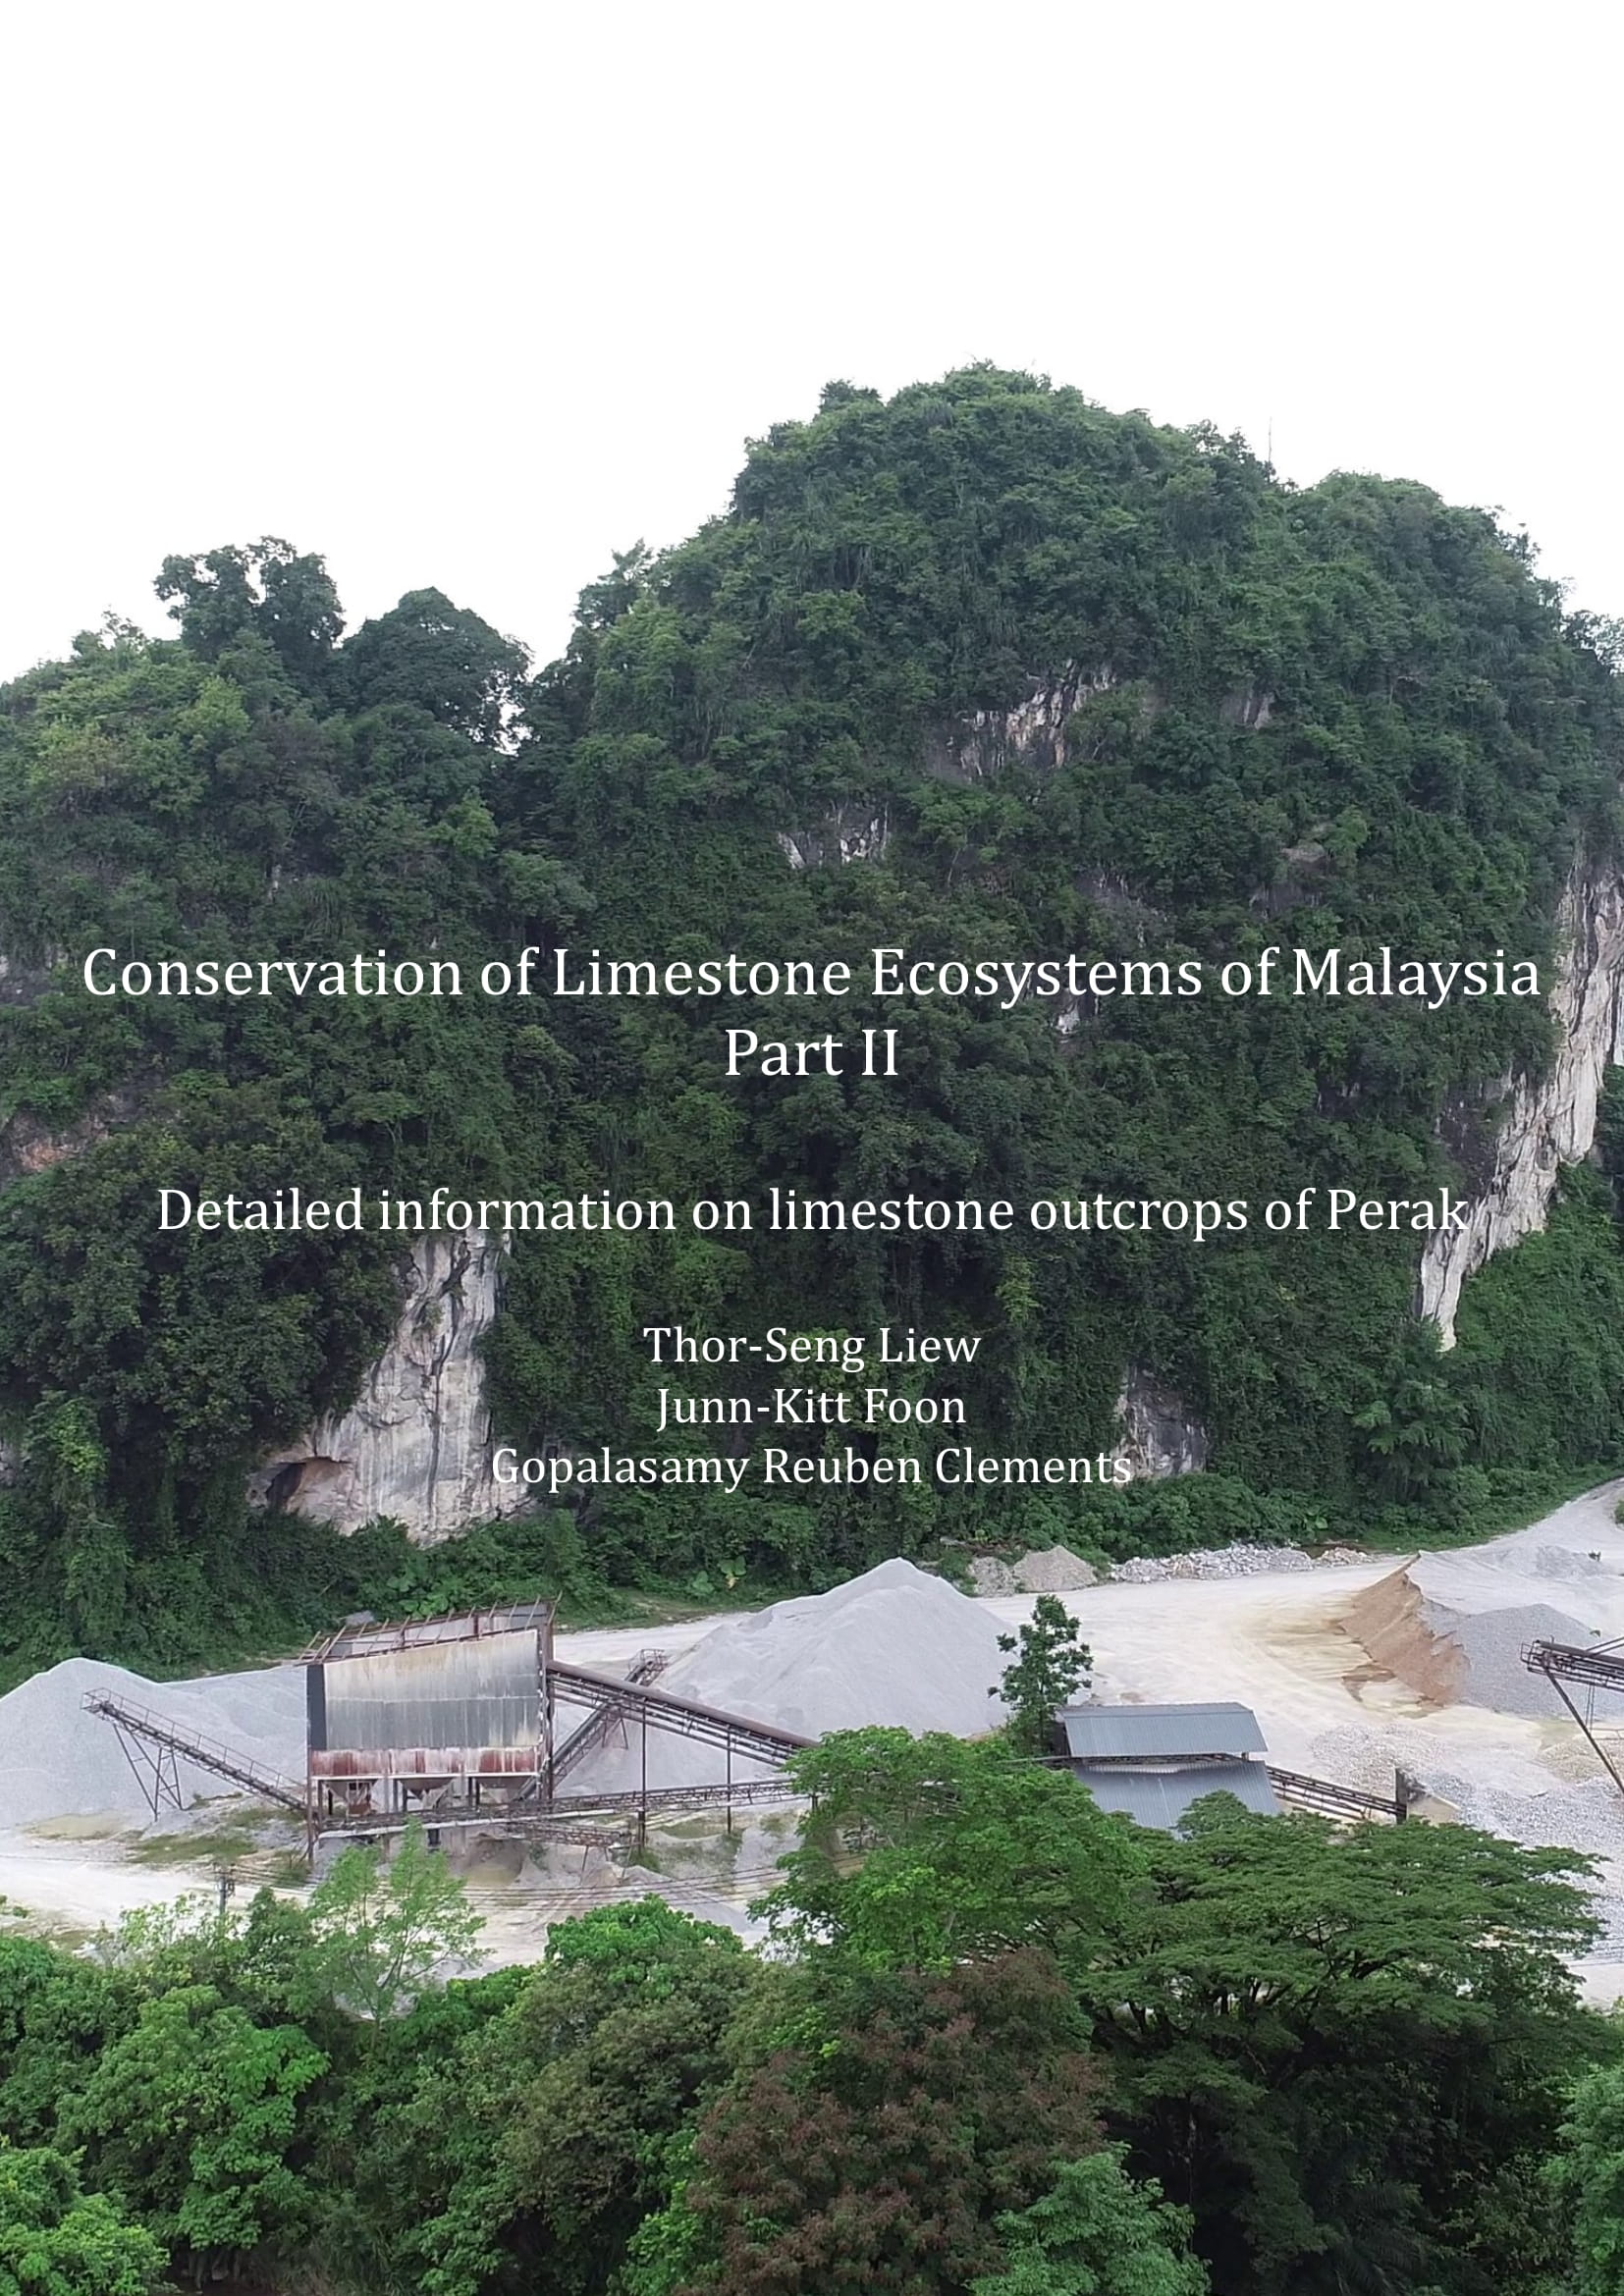 Conservation of Limestone Ecosystems of Malaysia, Part II, Detailed information on limestone outcrops of Perak.